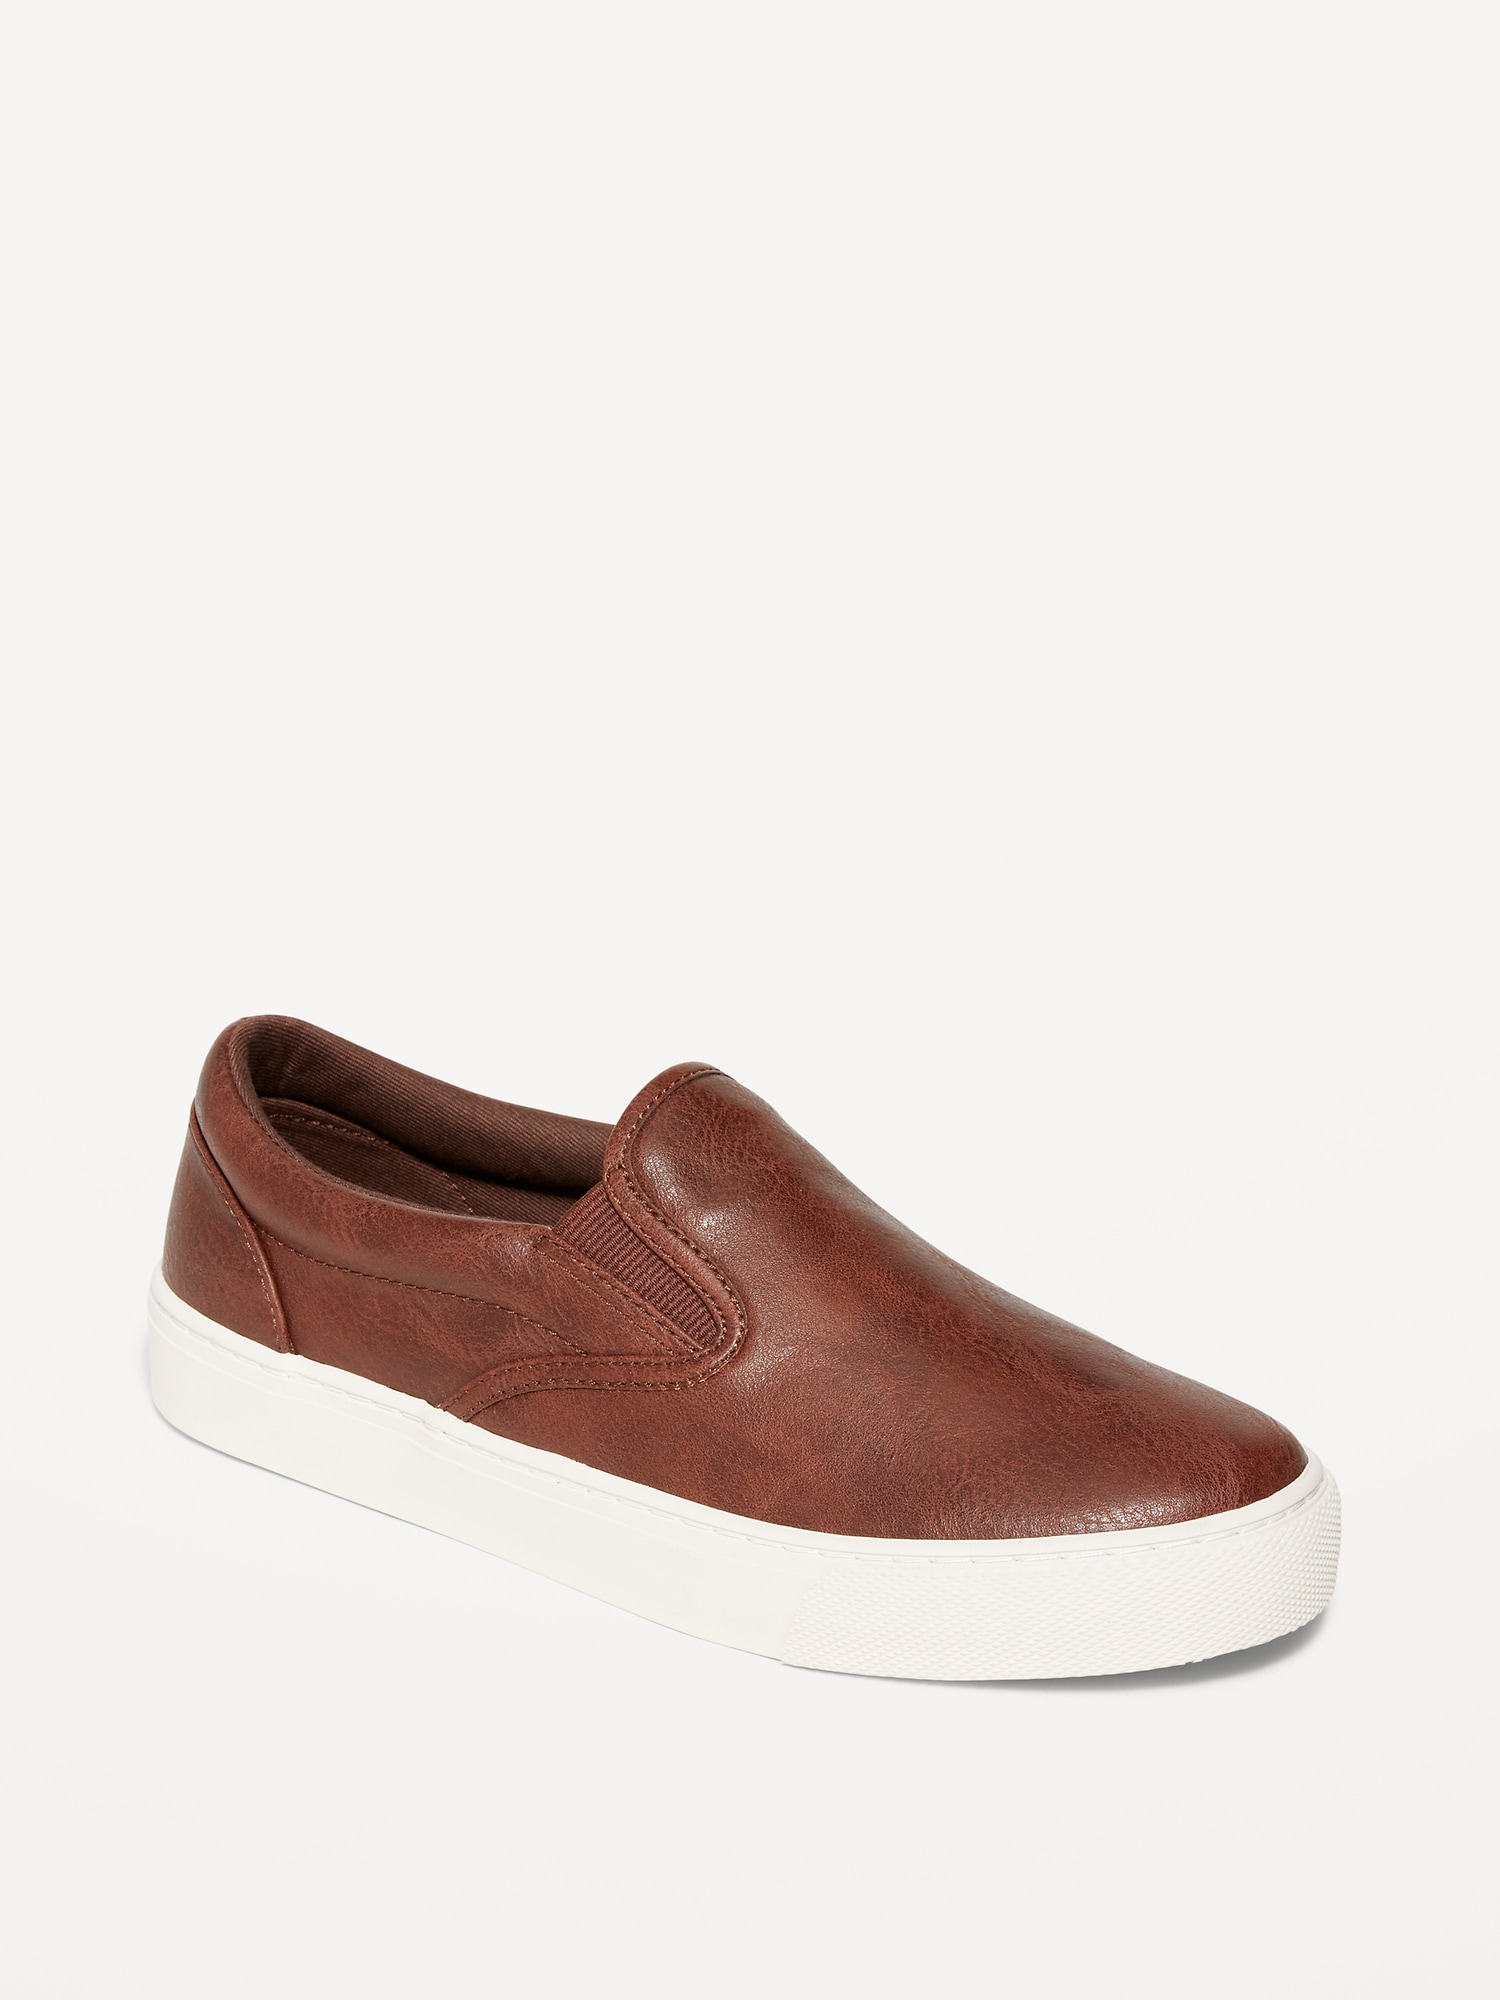 Gender-Neutral Canvas Slip-On Sneakers for Kids | Old Navy